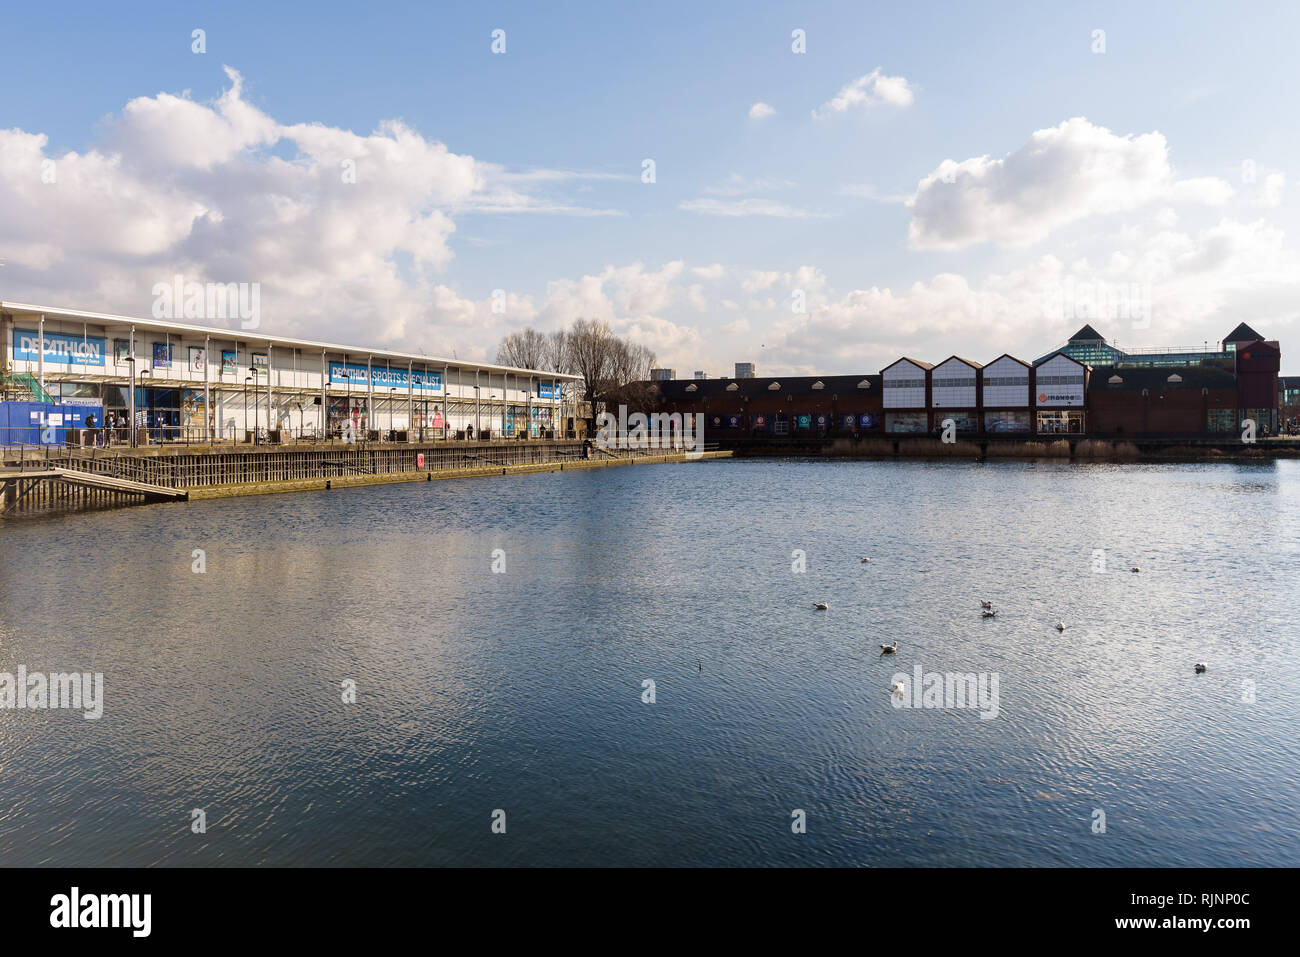 View of Decathlon Sports Centre and Surrey Quays Shopping Centre across the pond in Canada Water on a sunny day. London, England. Stock Photo